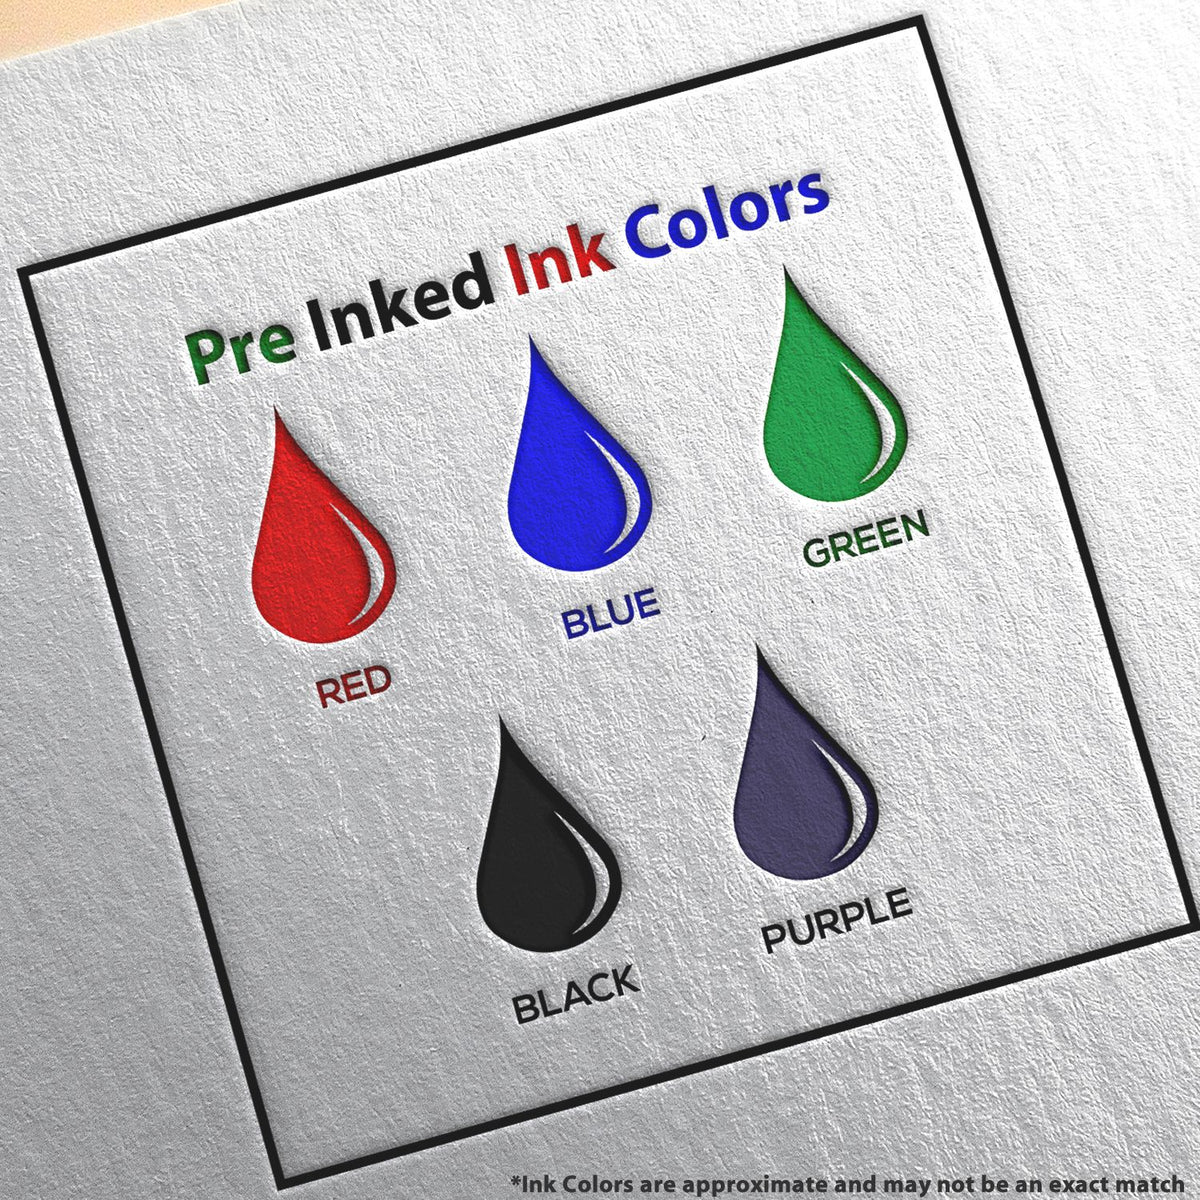 A picture showing the different ink colors or hues available for the Slim Pre-Inked Kansas Architect Seal Stamp product.